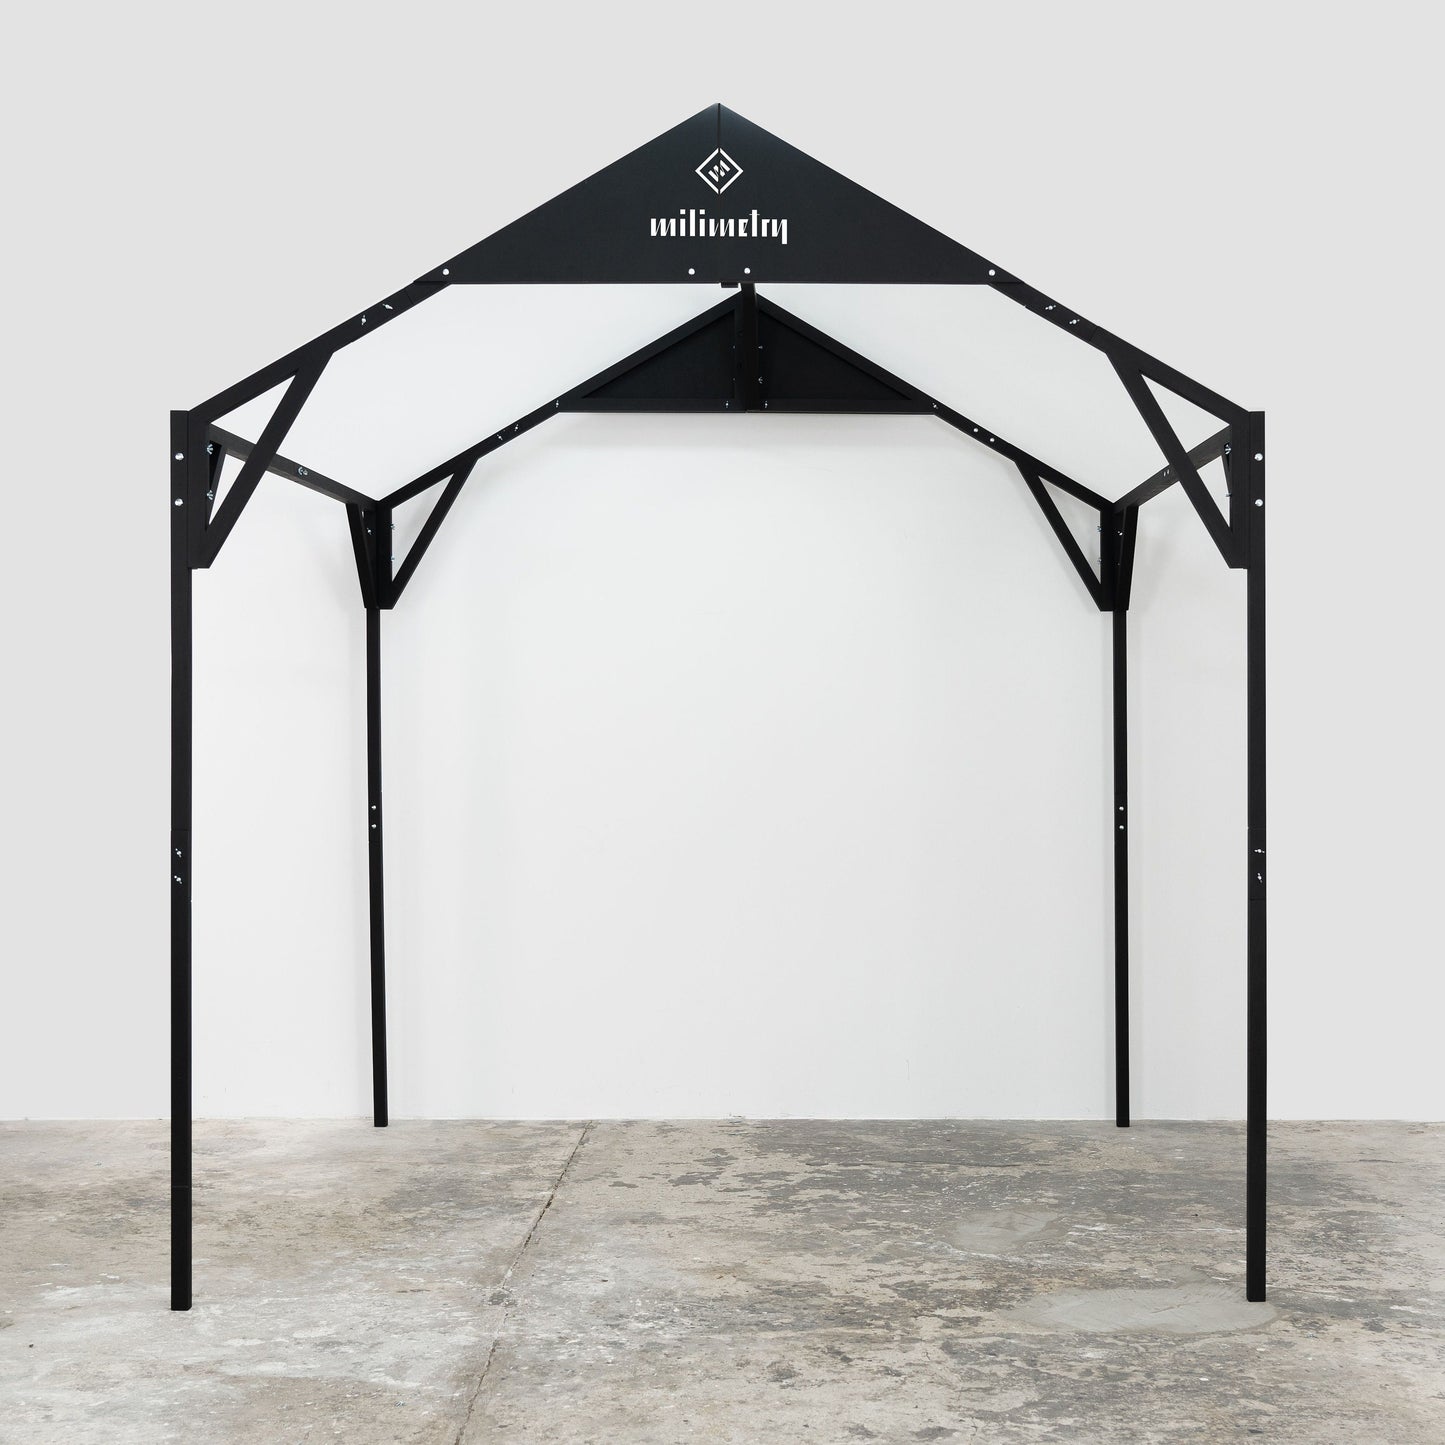 Trade show foldable wooden gazebo canopy VH-01, tent alternative, 6.5'x6.5', 8'x8', 10'x10' booth size | Milimetry